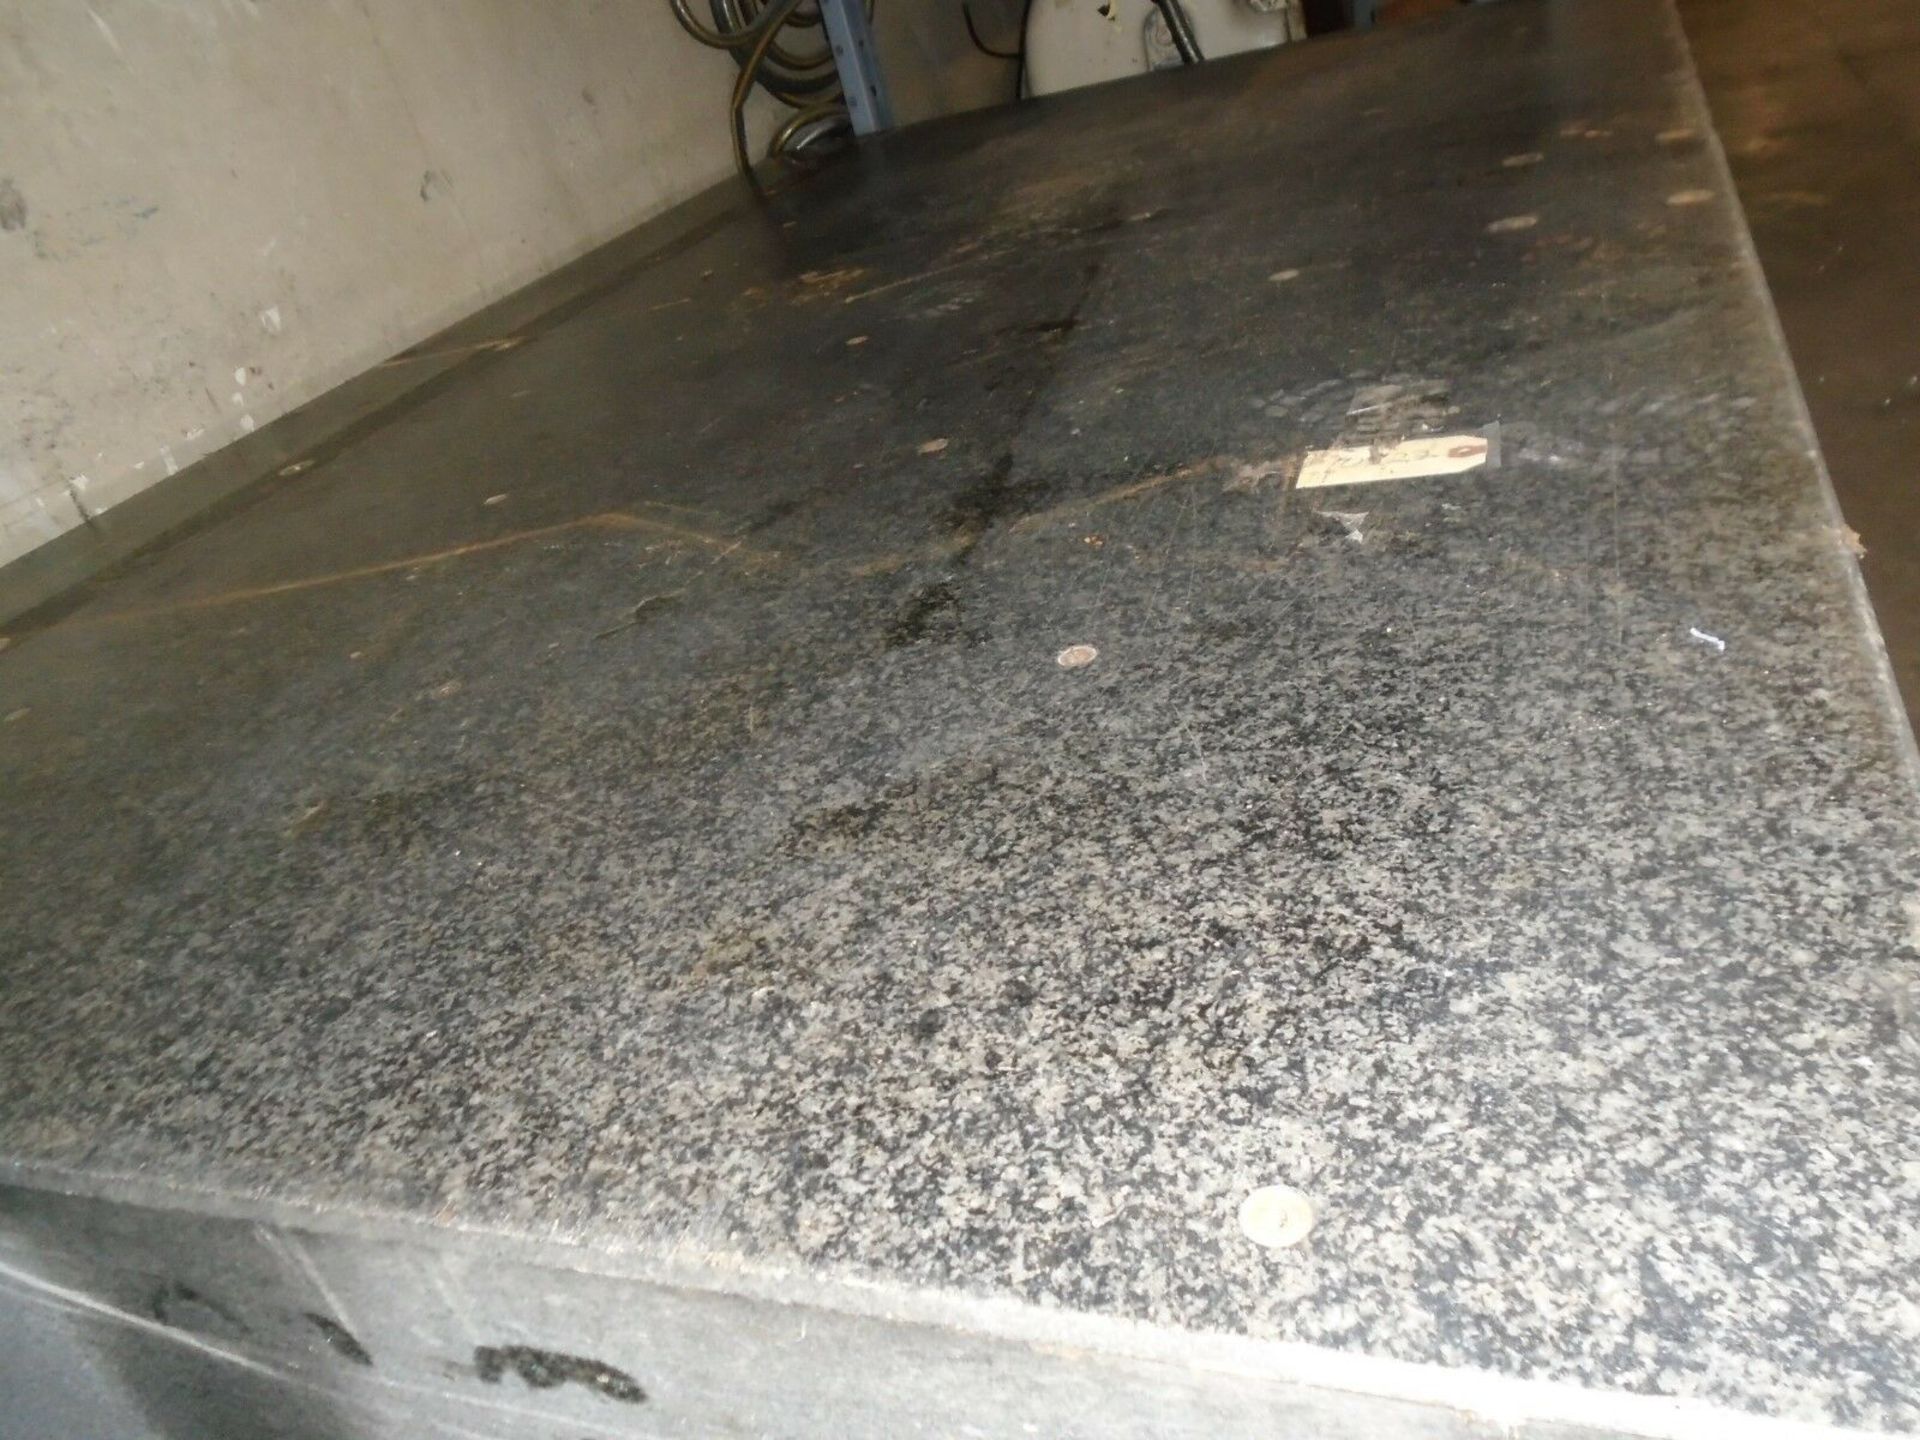 Mitutoyo 78” x 50” x 12” Thick CMM Quality Granite Surface Plate - Image 6 of 8